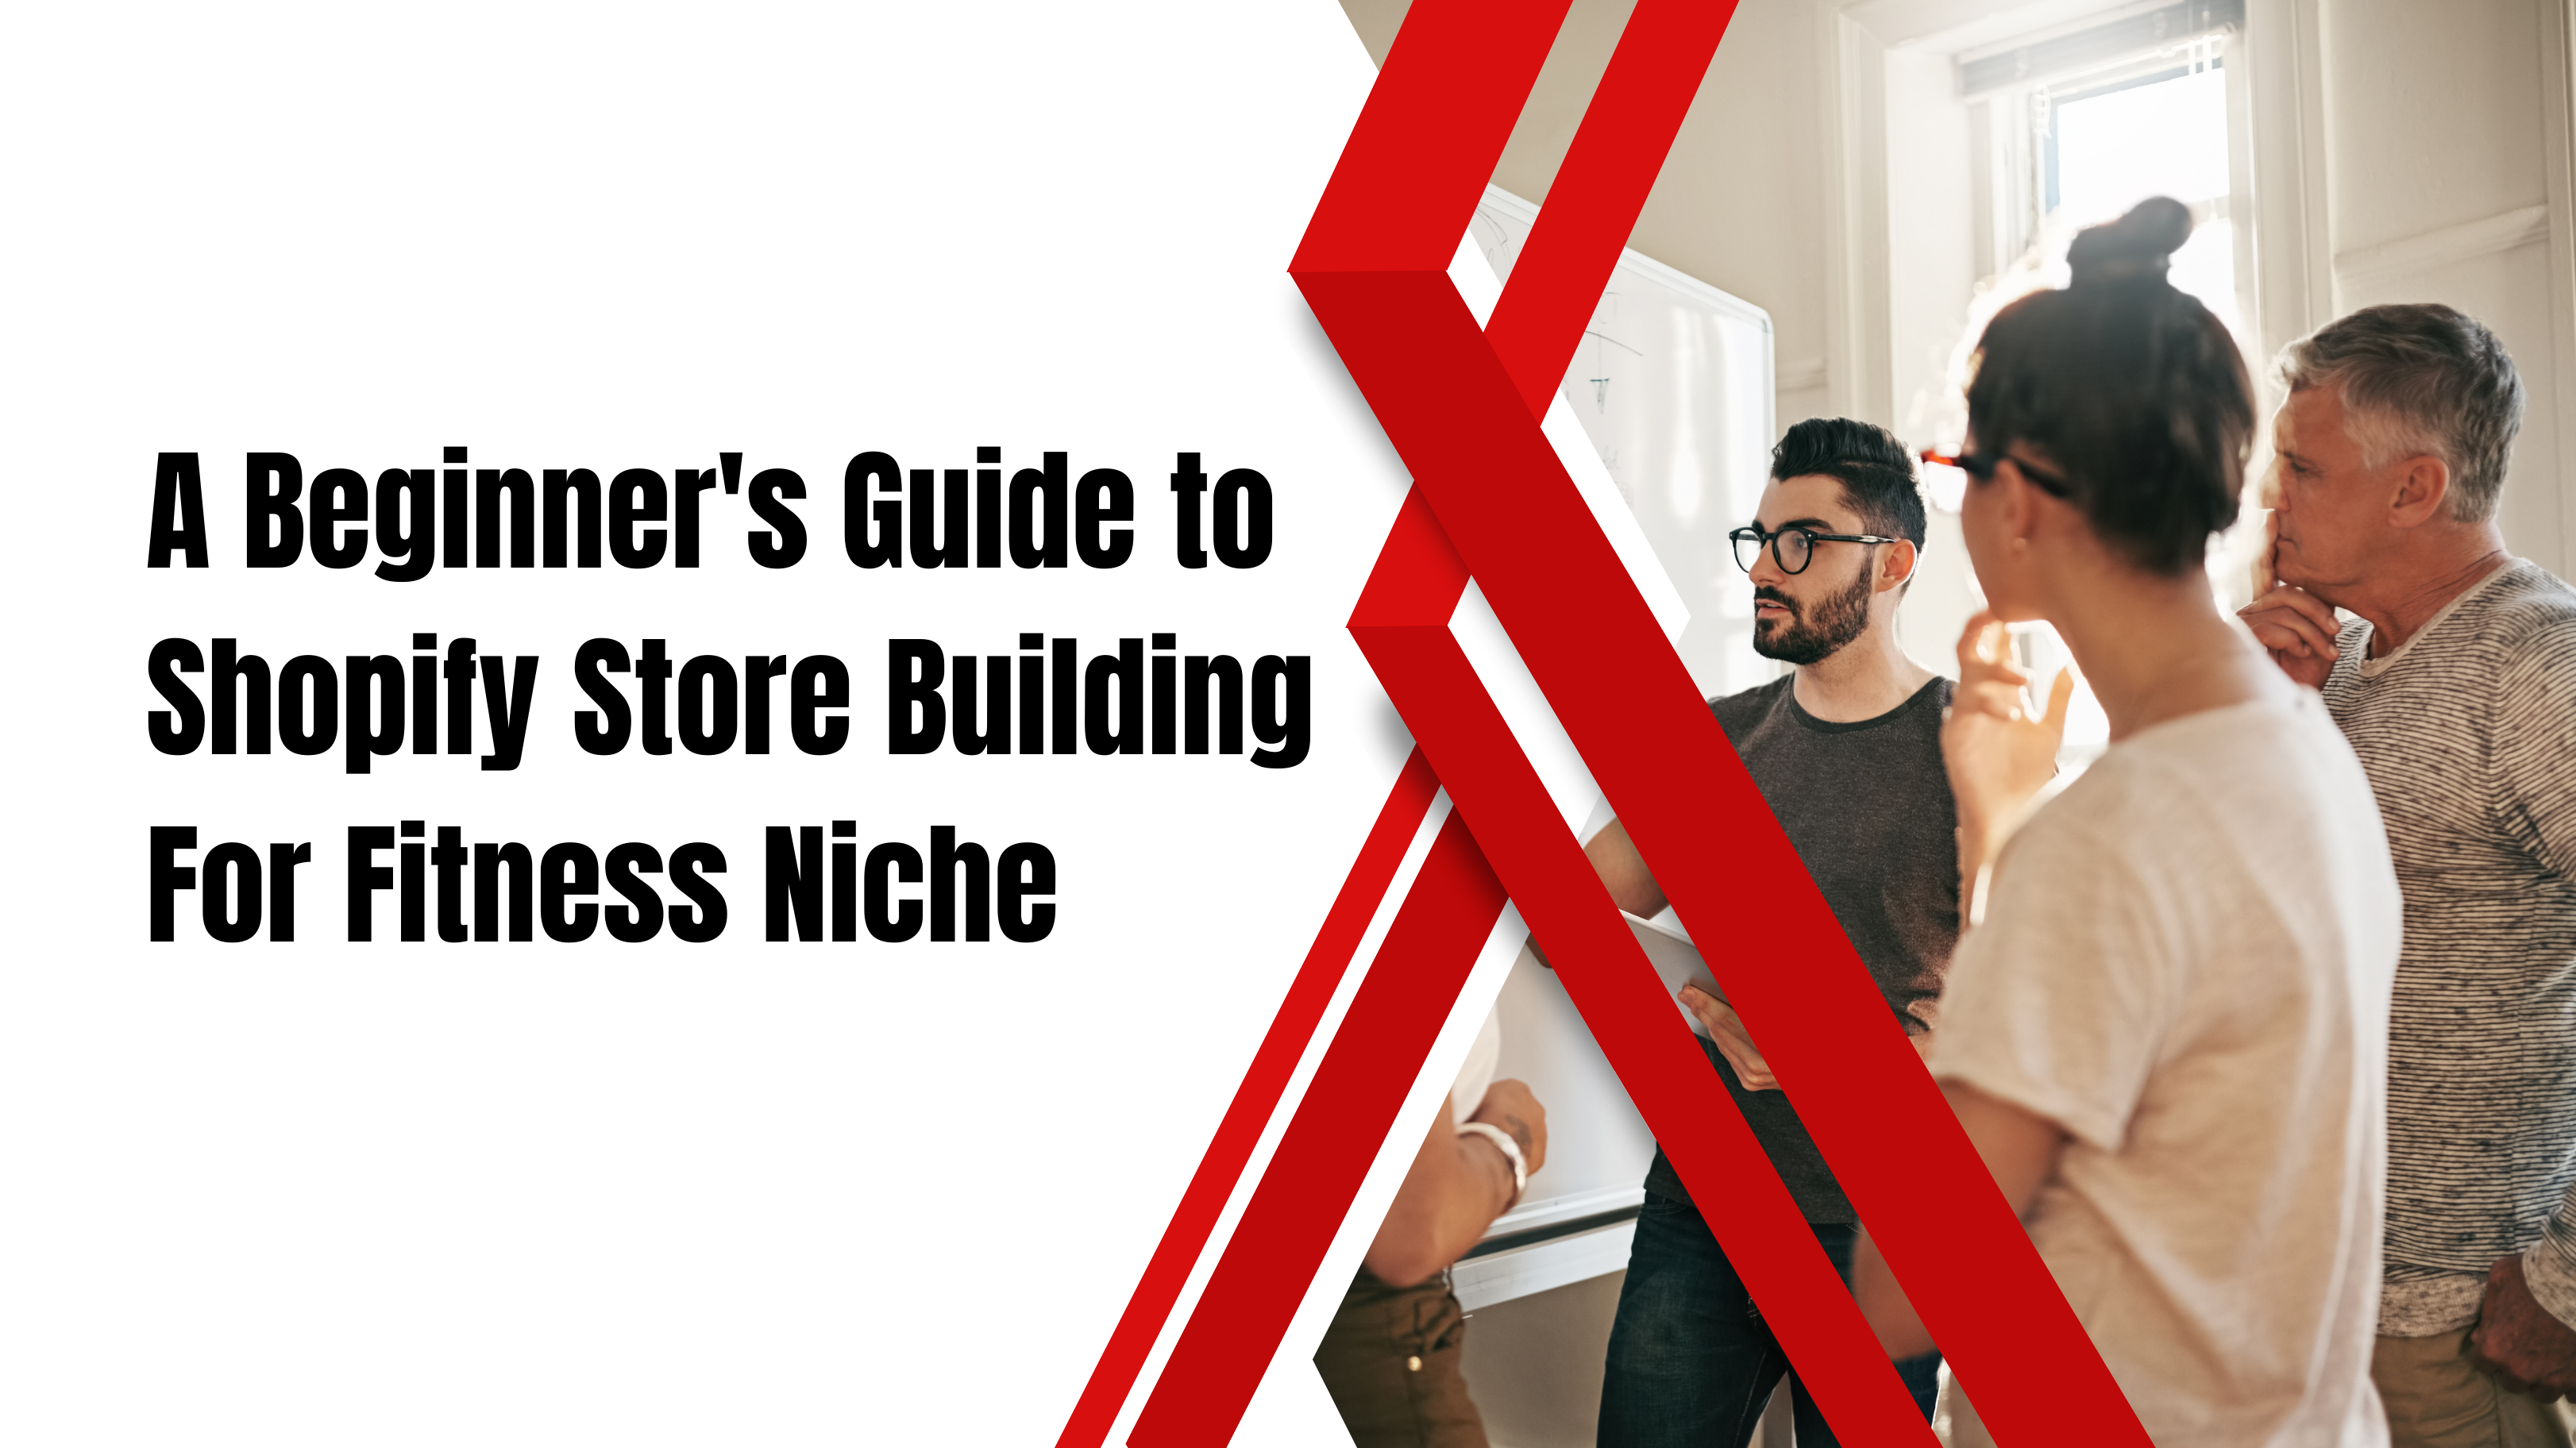 A Beginner's Guide to Shopify Store Building For Fitness Niche